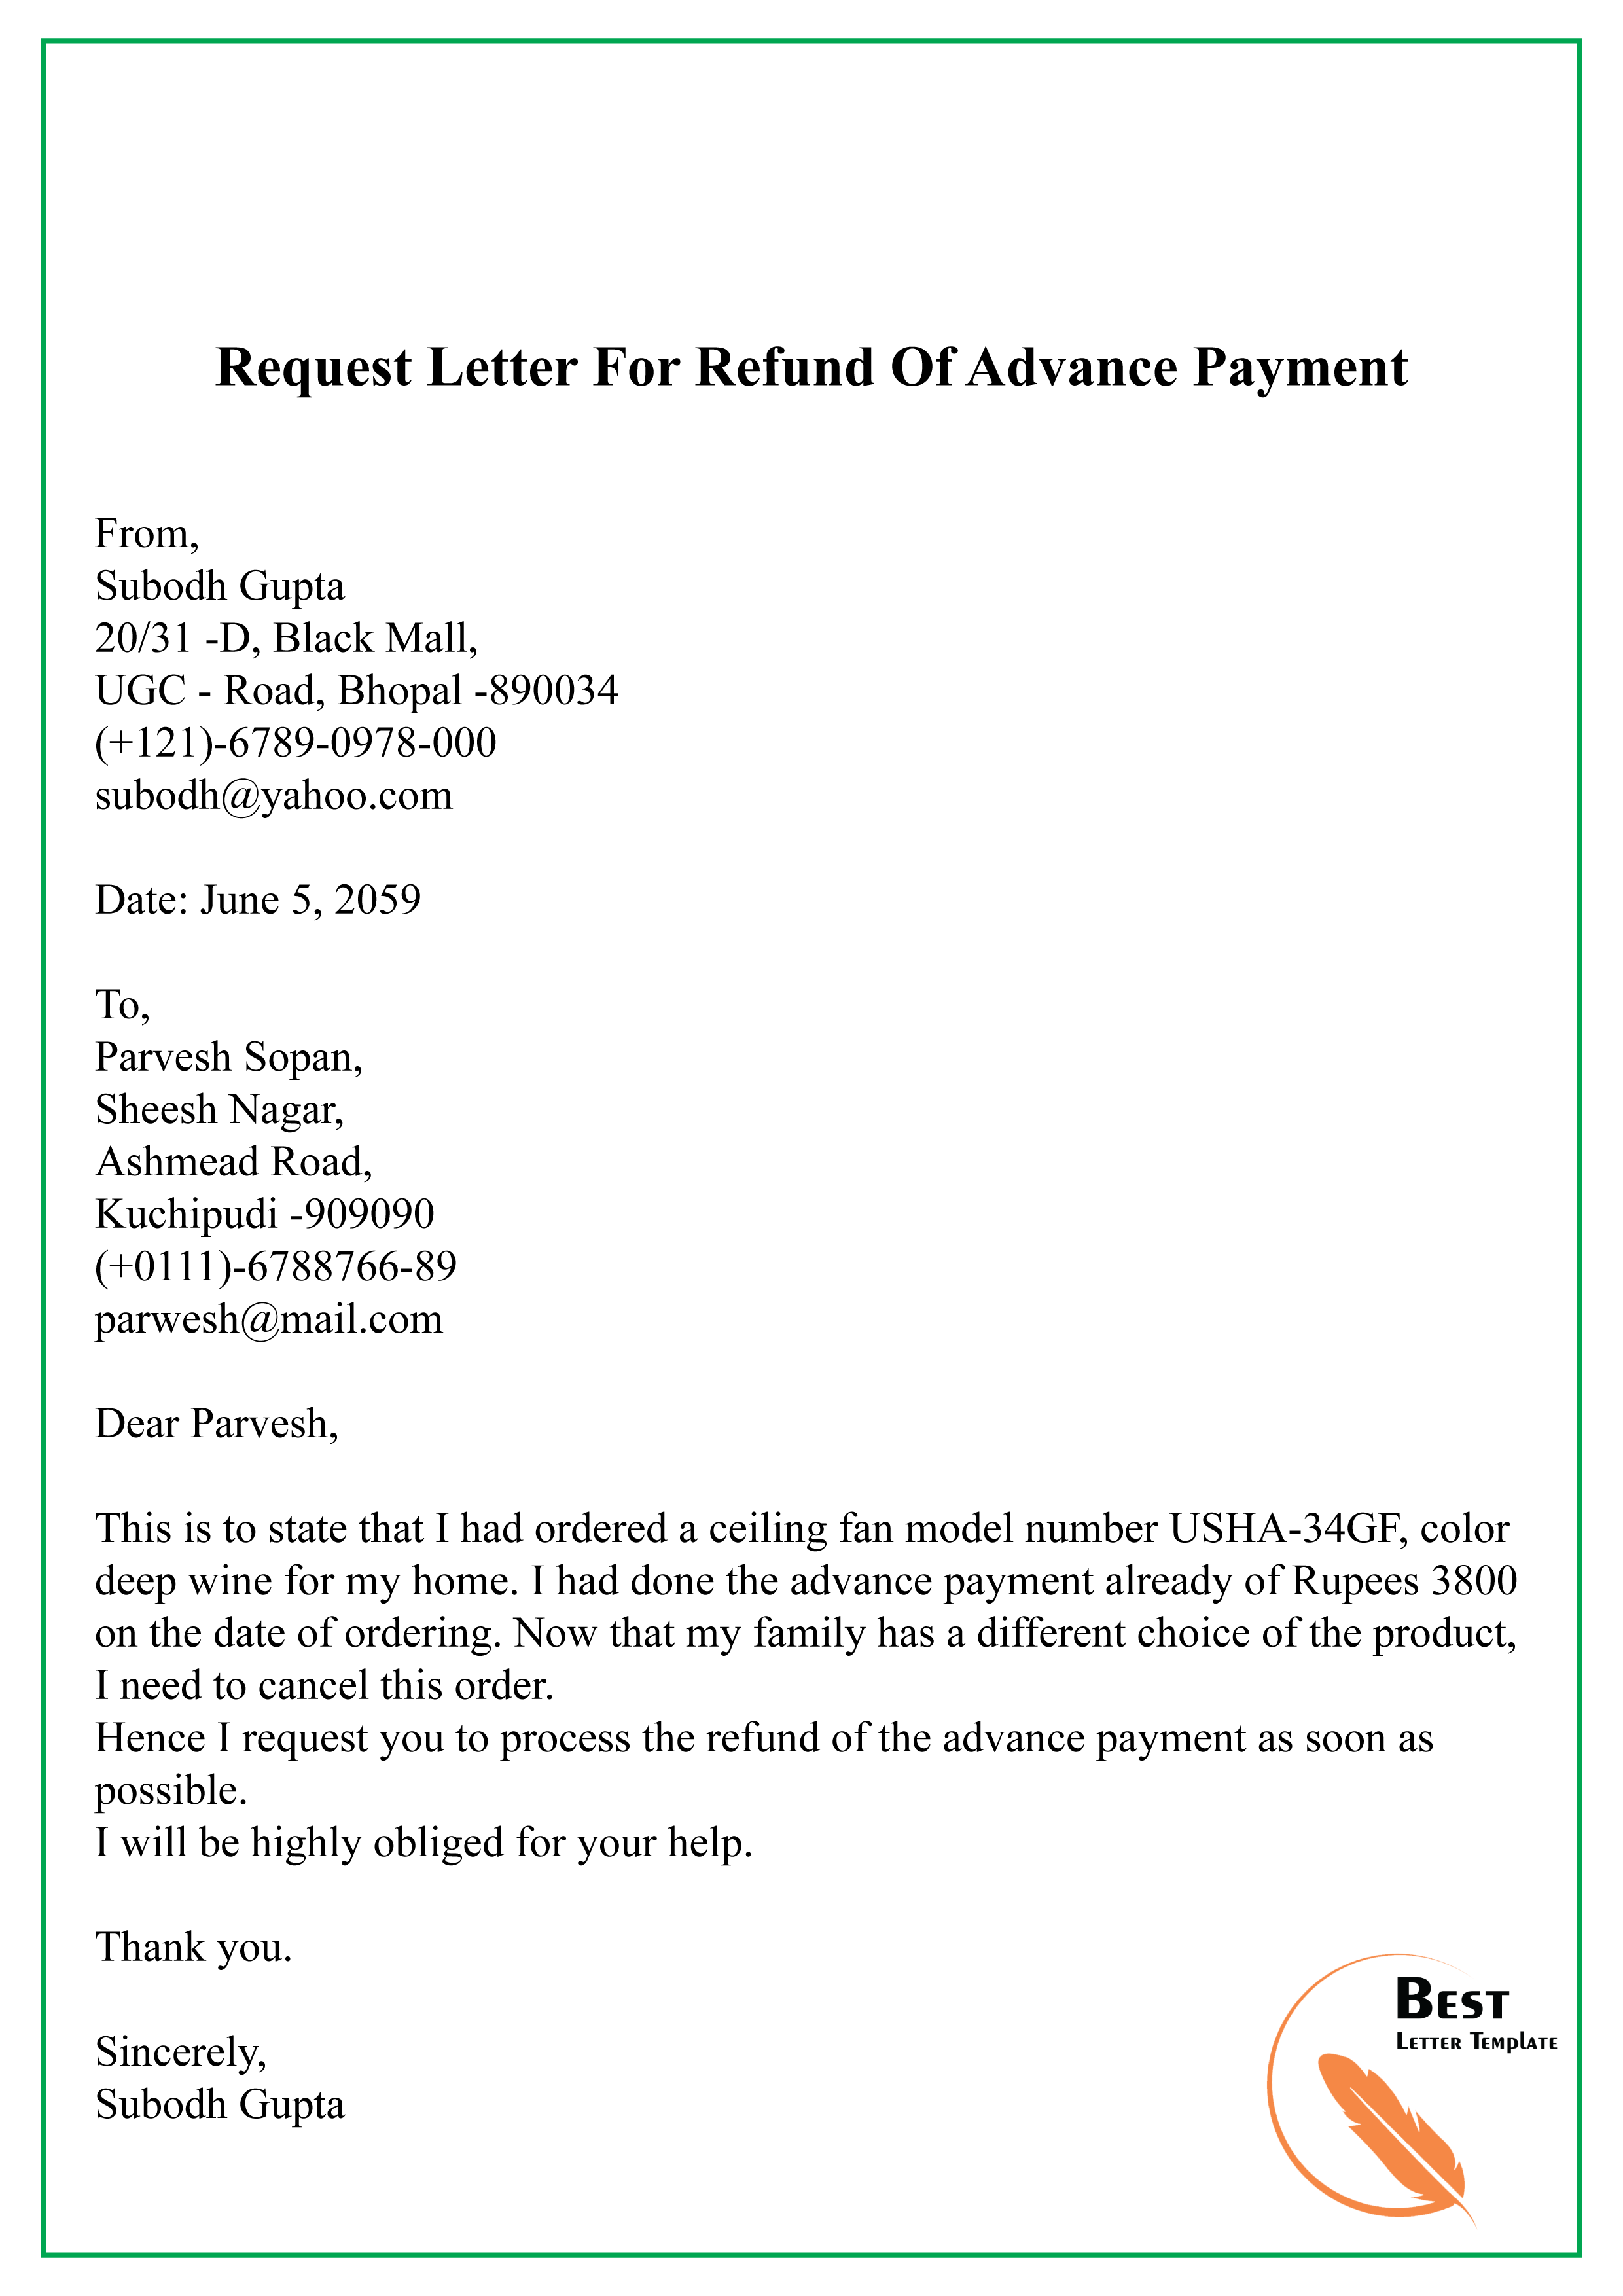 request-letter-for-refund-of-advance-payment-01-best-letter-template